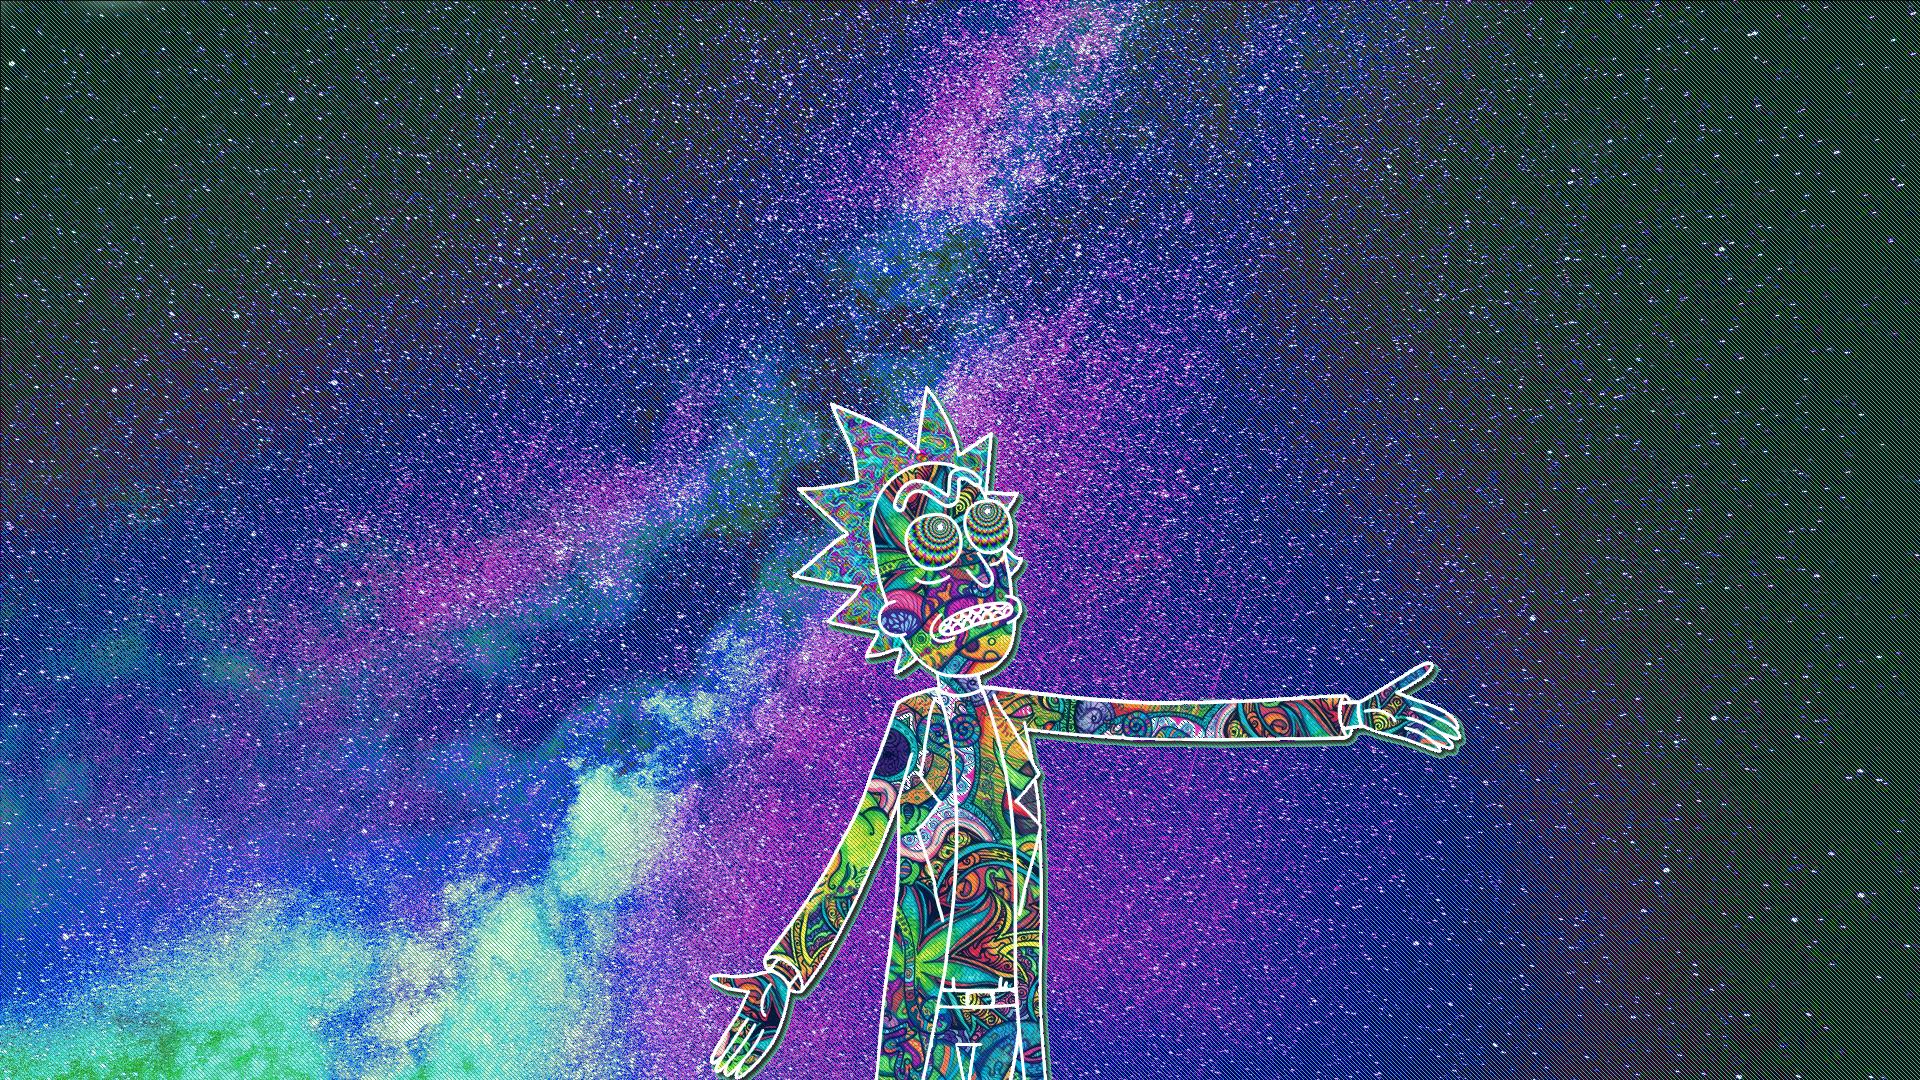 Rick and Morty trip wallpaper by sunflowerfeels  Download on ZEDGE  d725